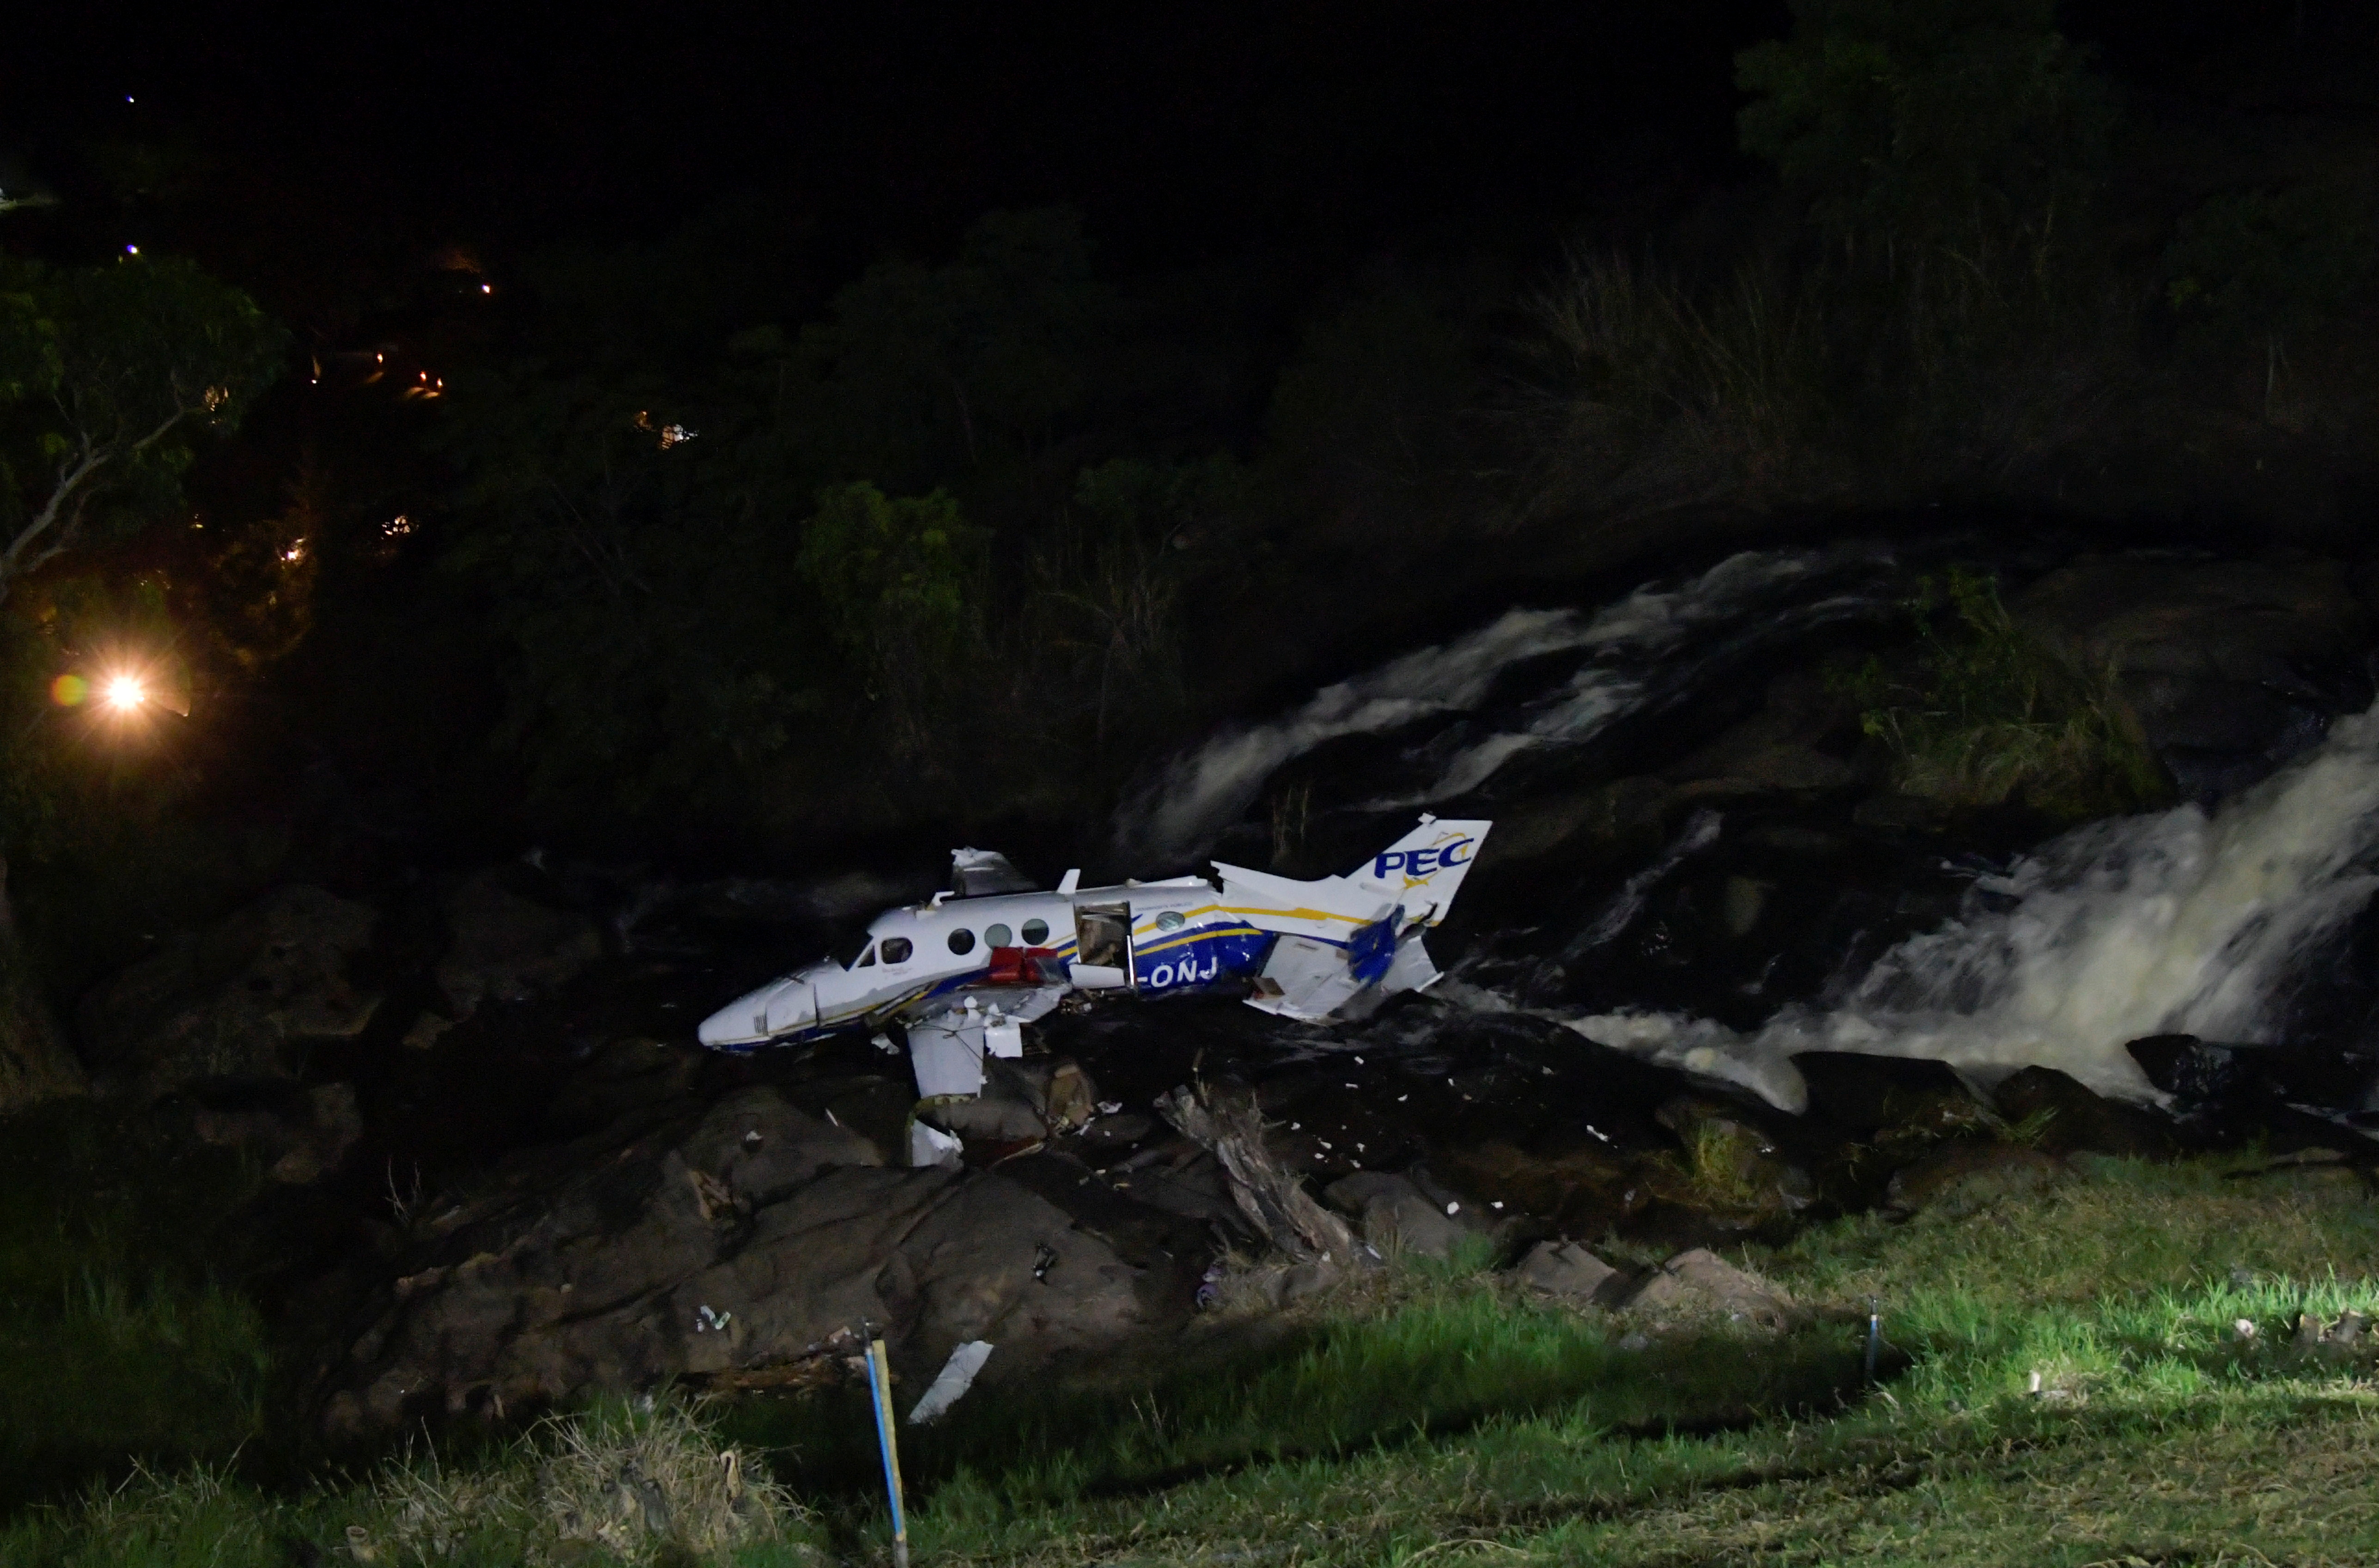 The wreckage of a small airplane that crashed with Brazilian country singer  Marilia Mendonca, 26, aboard lies near a waterfall area in Piedade de  Caratinga, state of Minas Gerais, Brazil, November 5